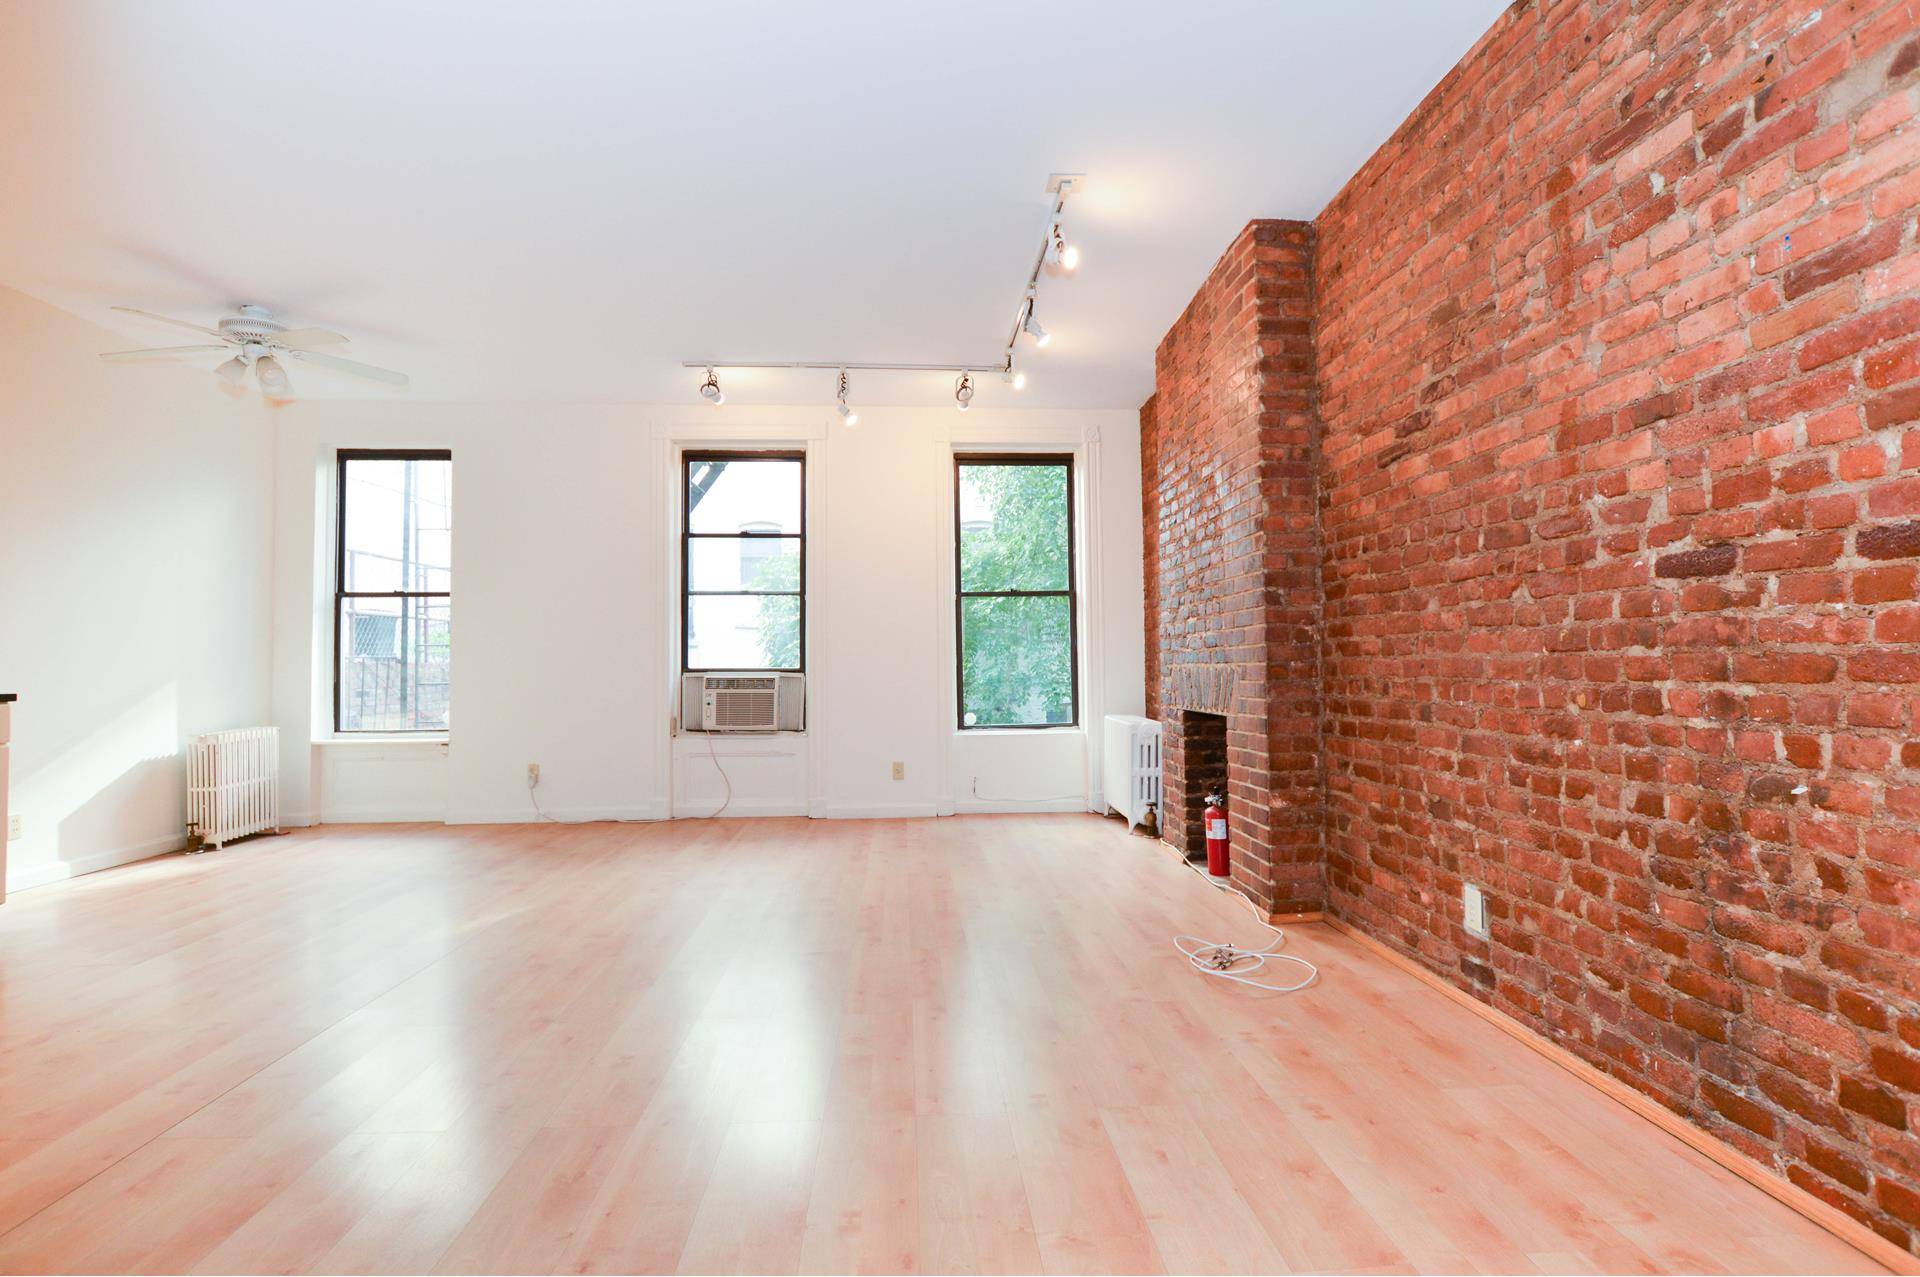 Available NOW. This Stunning 3 Bedroom is in the center of Park Slope.